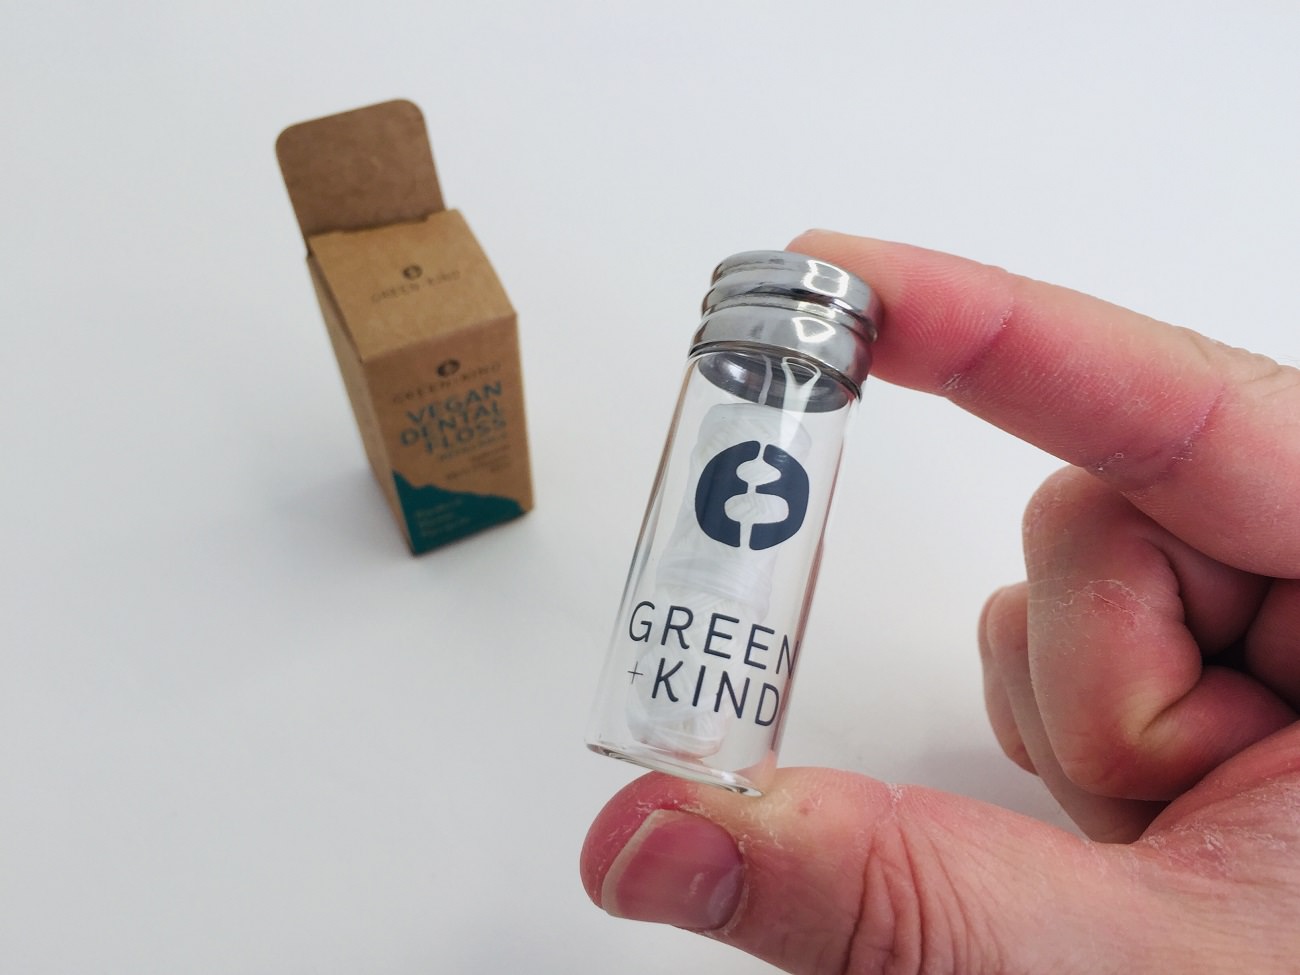 Holding the glass vial of Vegan floss by Green + Kind